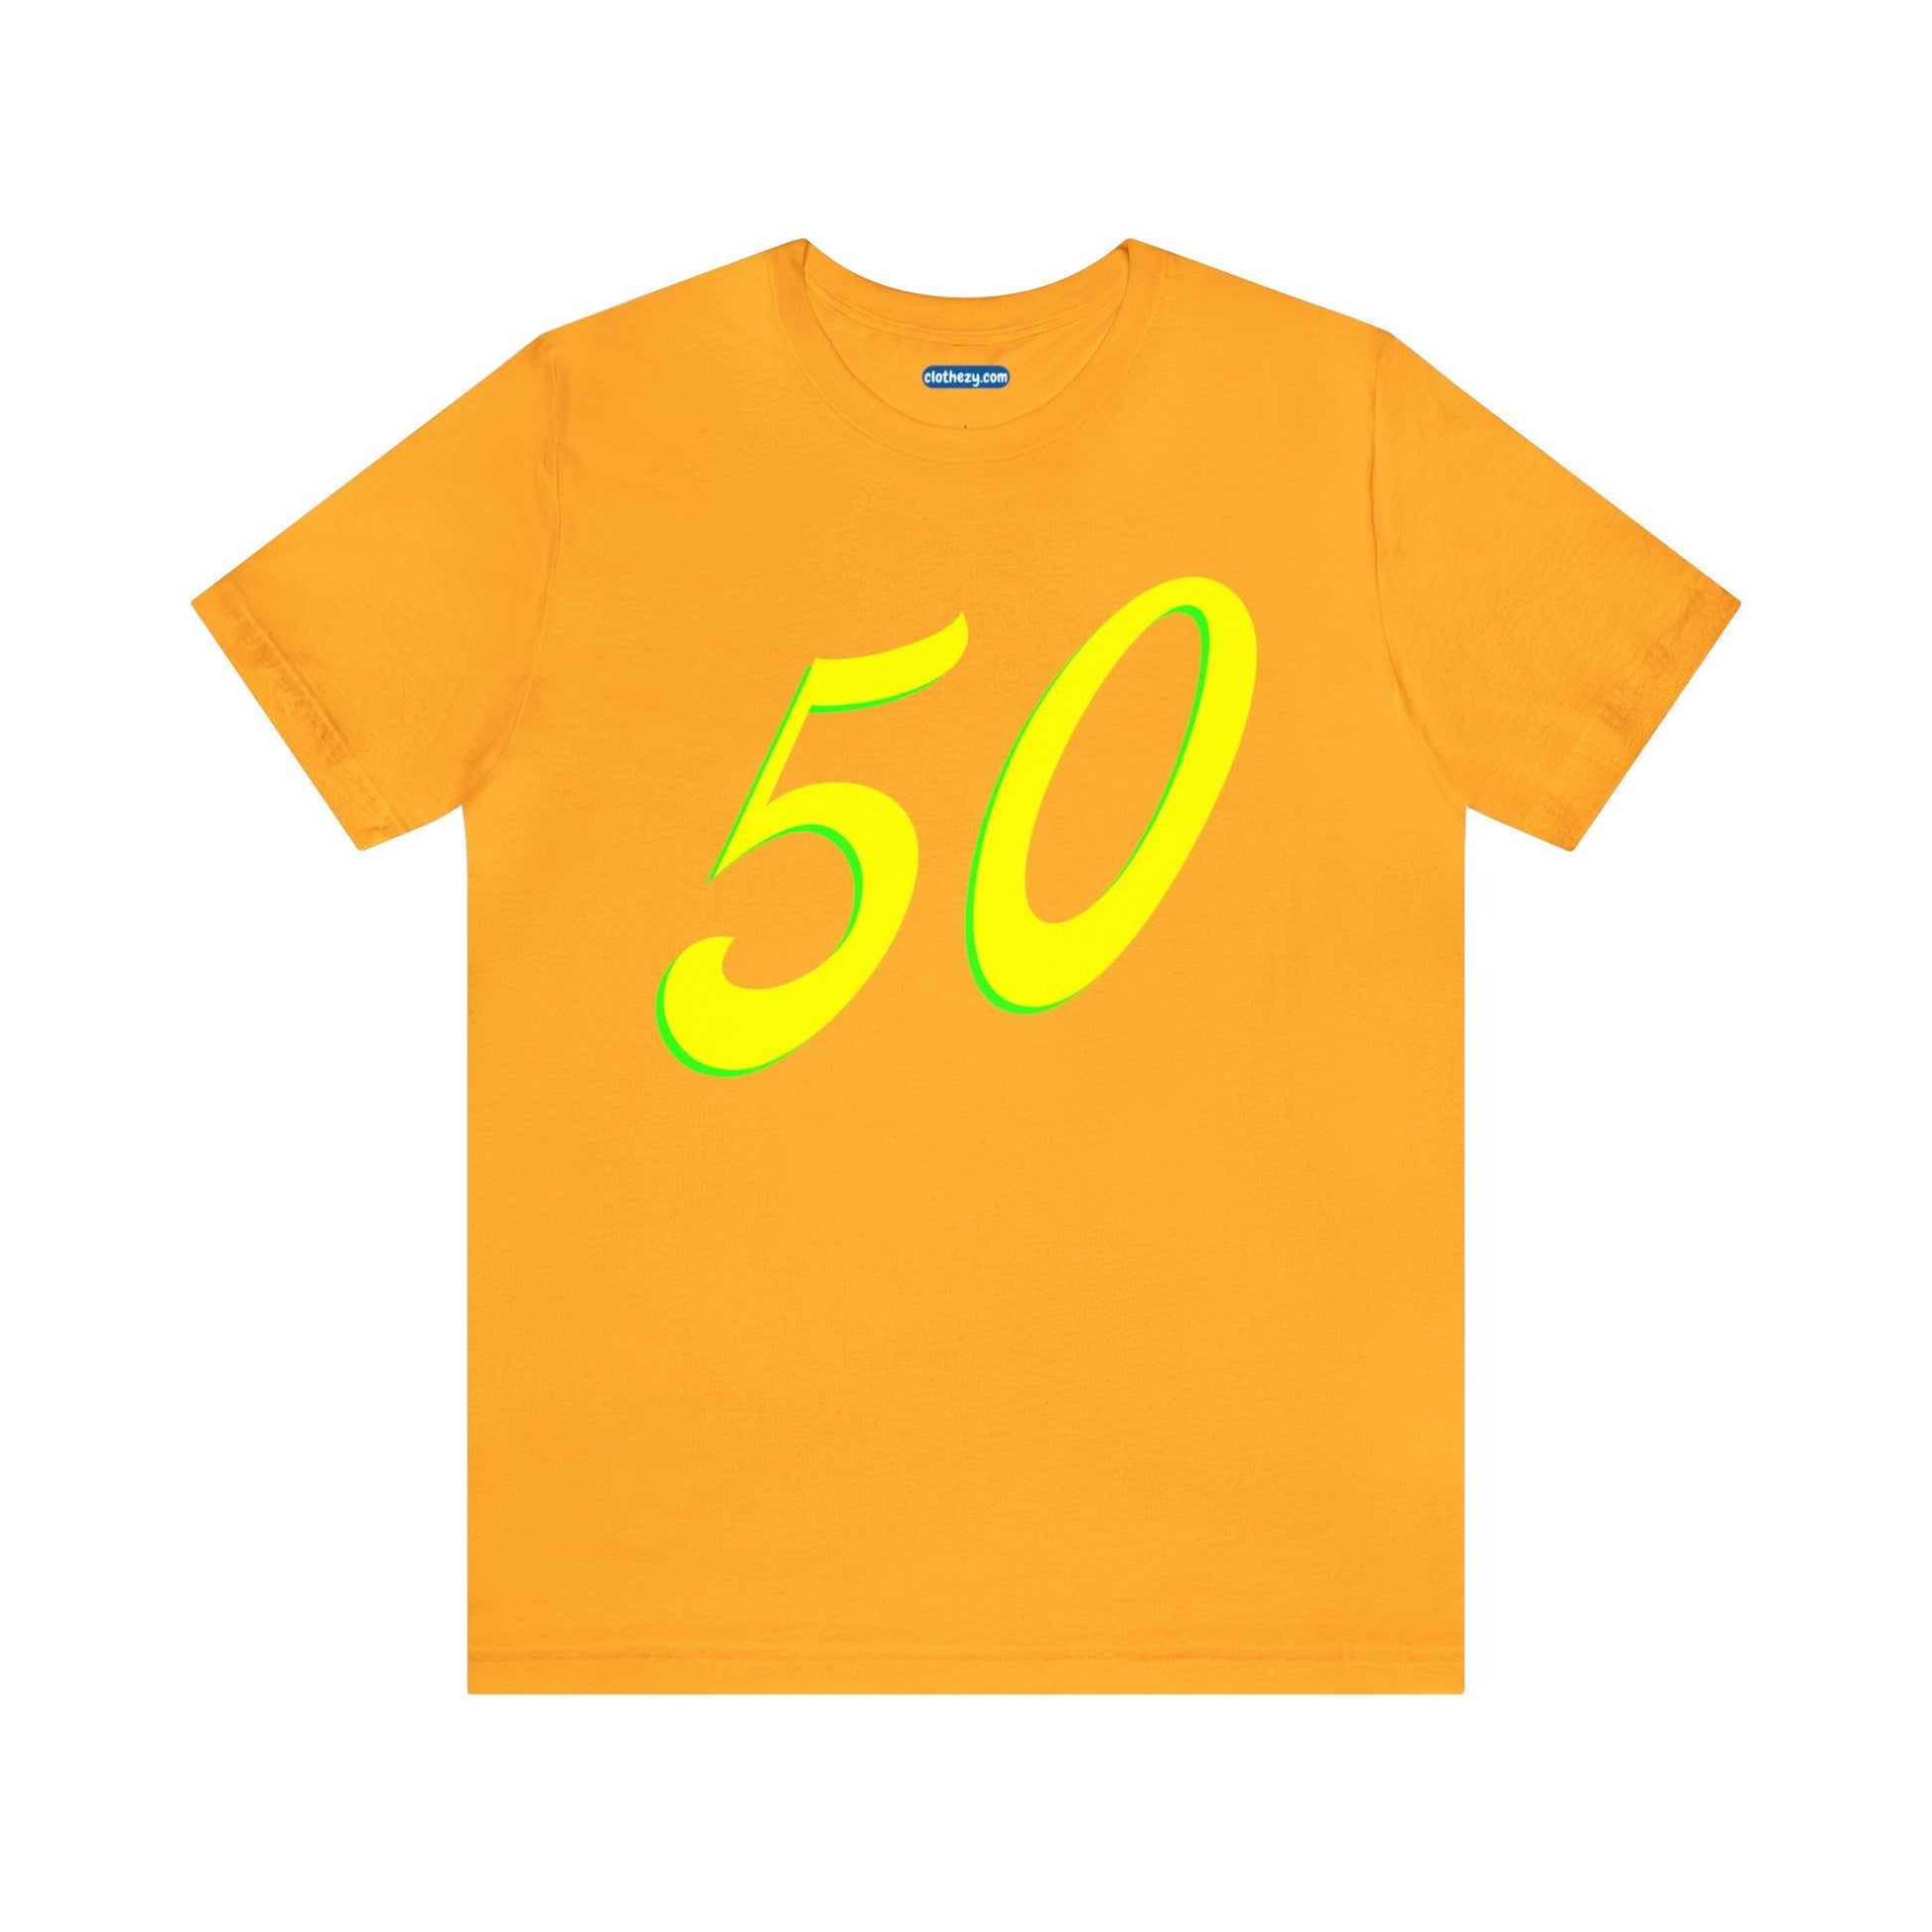 Number 50 Design - Soft Cotton Tee for birthdays and celebrations, Gift for friends and family, Multiple Options by clothezy.com in Asphalt Size Small - Buy Now